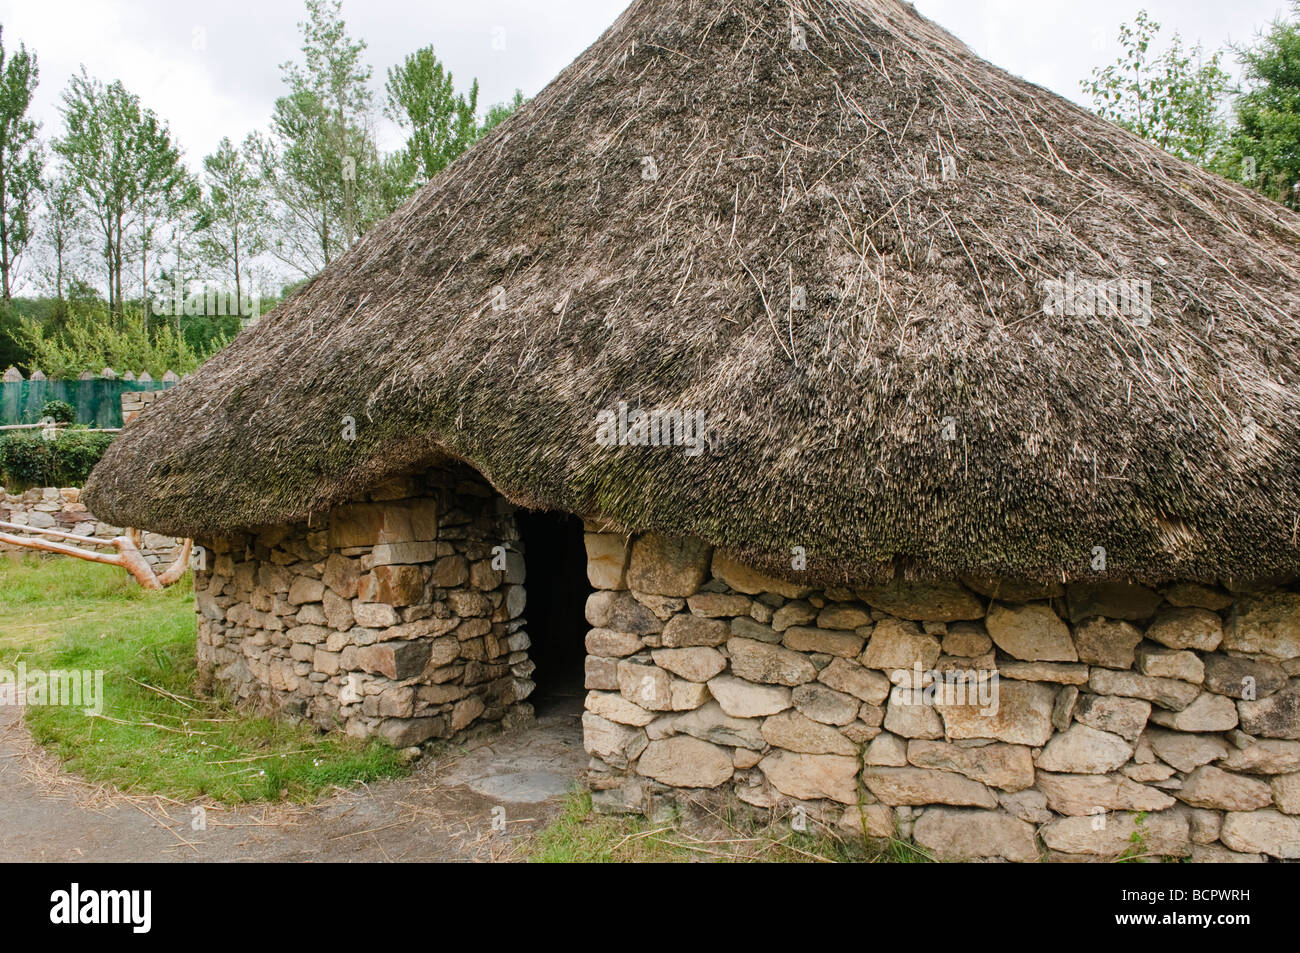 Thatched house at a monastic settlement, Irish National Heritage Park, County Wexford, Republic of Ireland Stock Photo